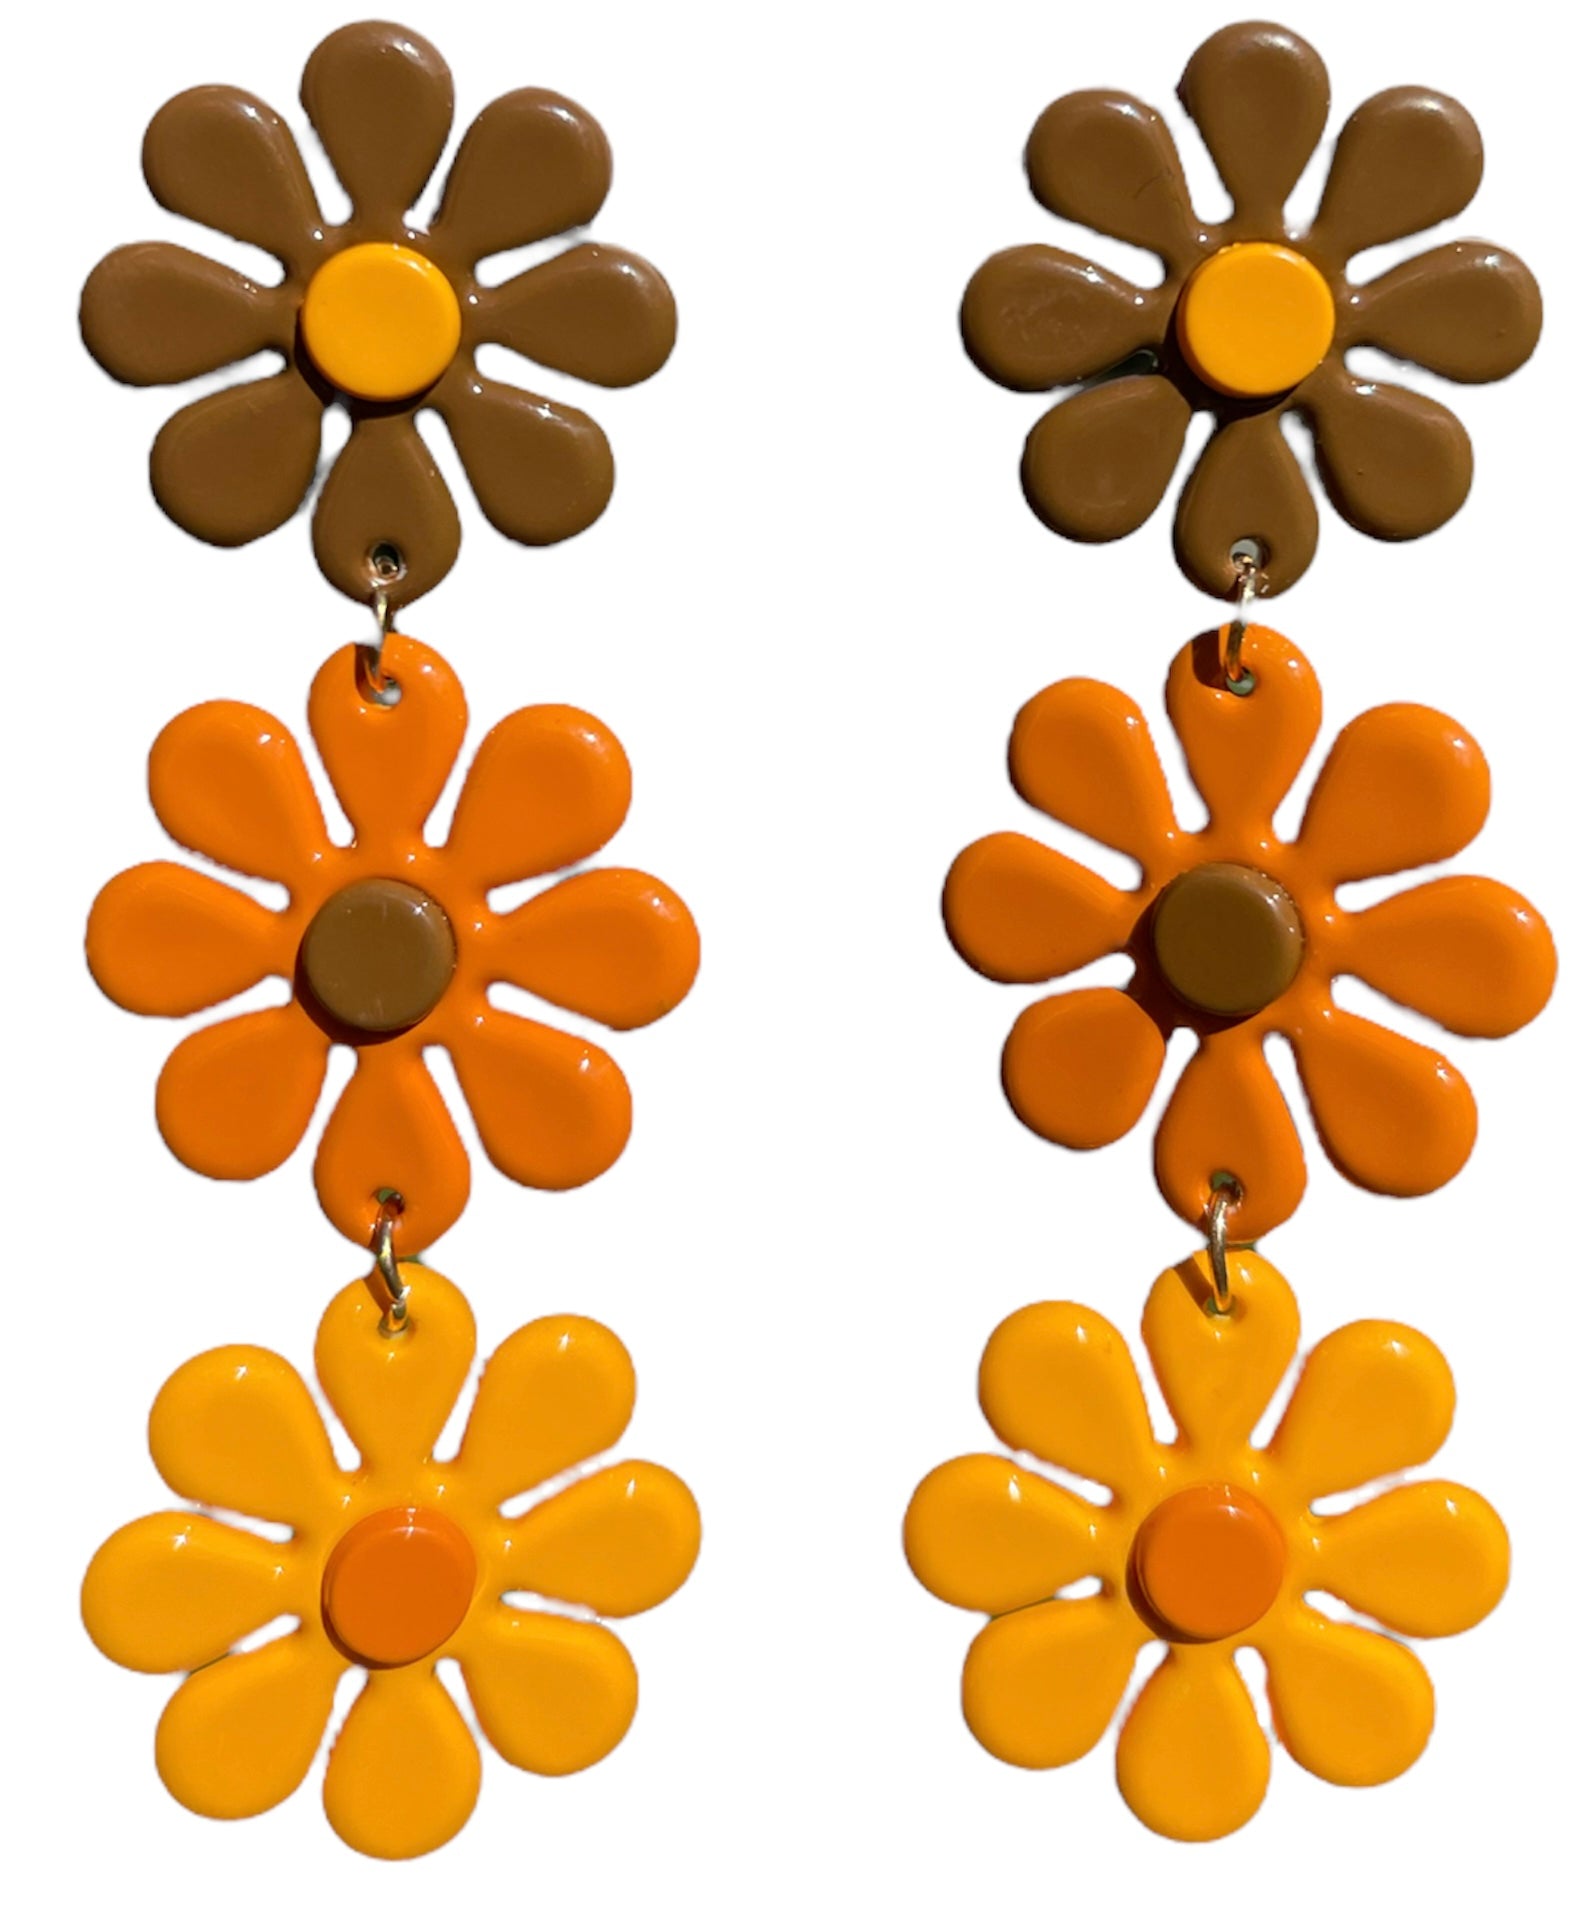 70s Falling for You Daisy Chain Groovy Retro Earrings - Relic828